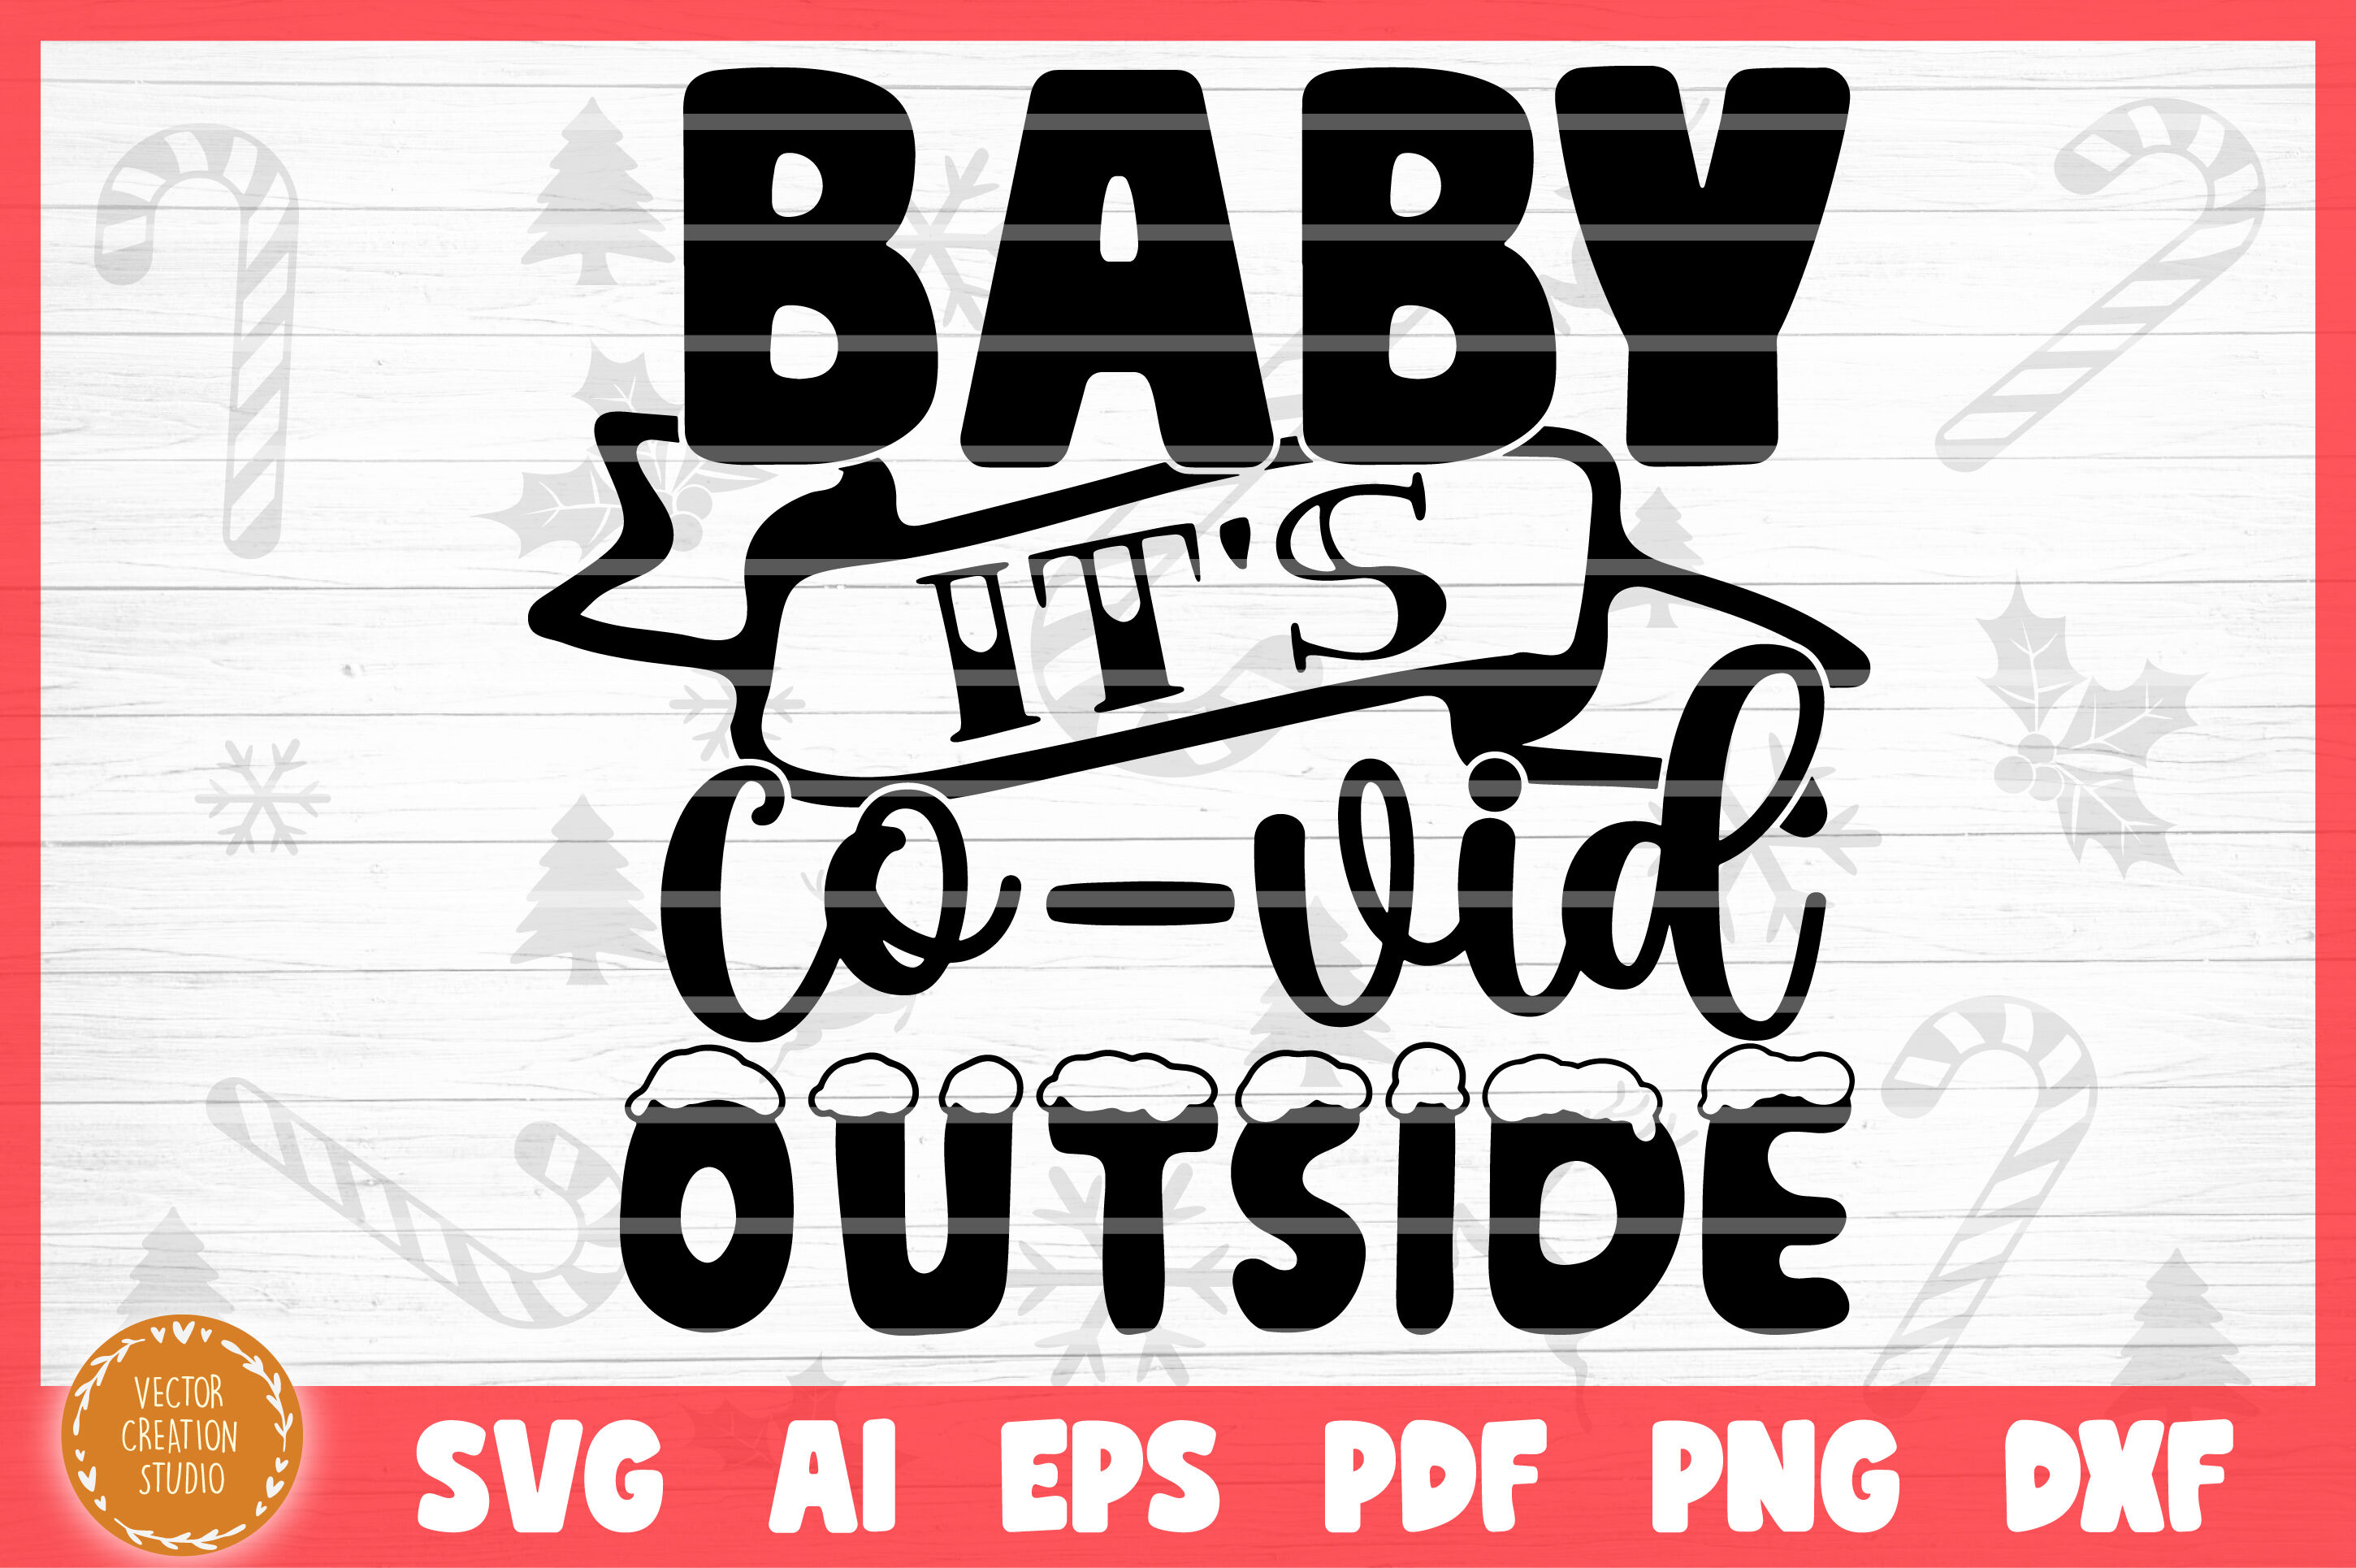 Download Baby It S Covid Outside Christmas 2020 Svg Cut File By Vectorcreationstudio Thehungryjpeg Com